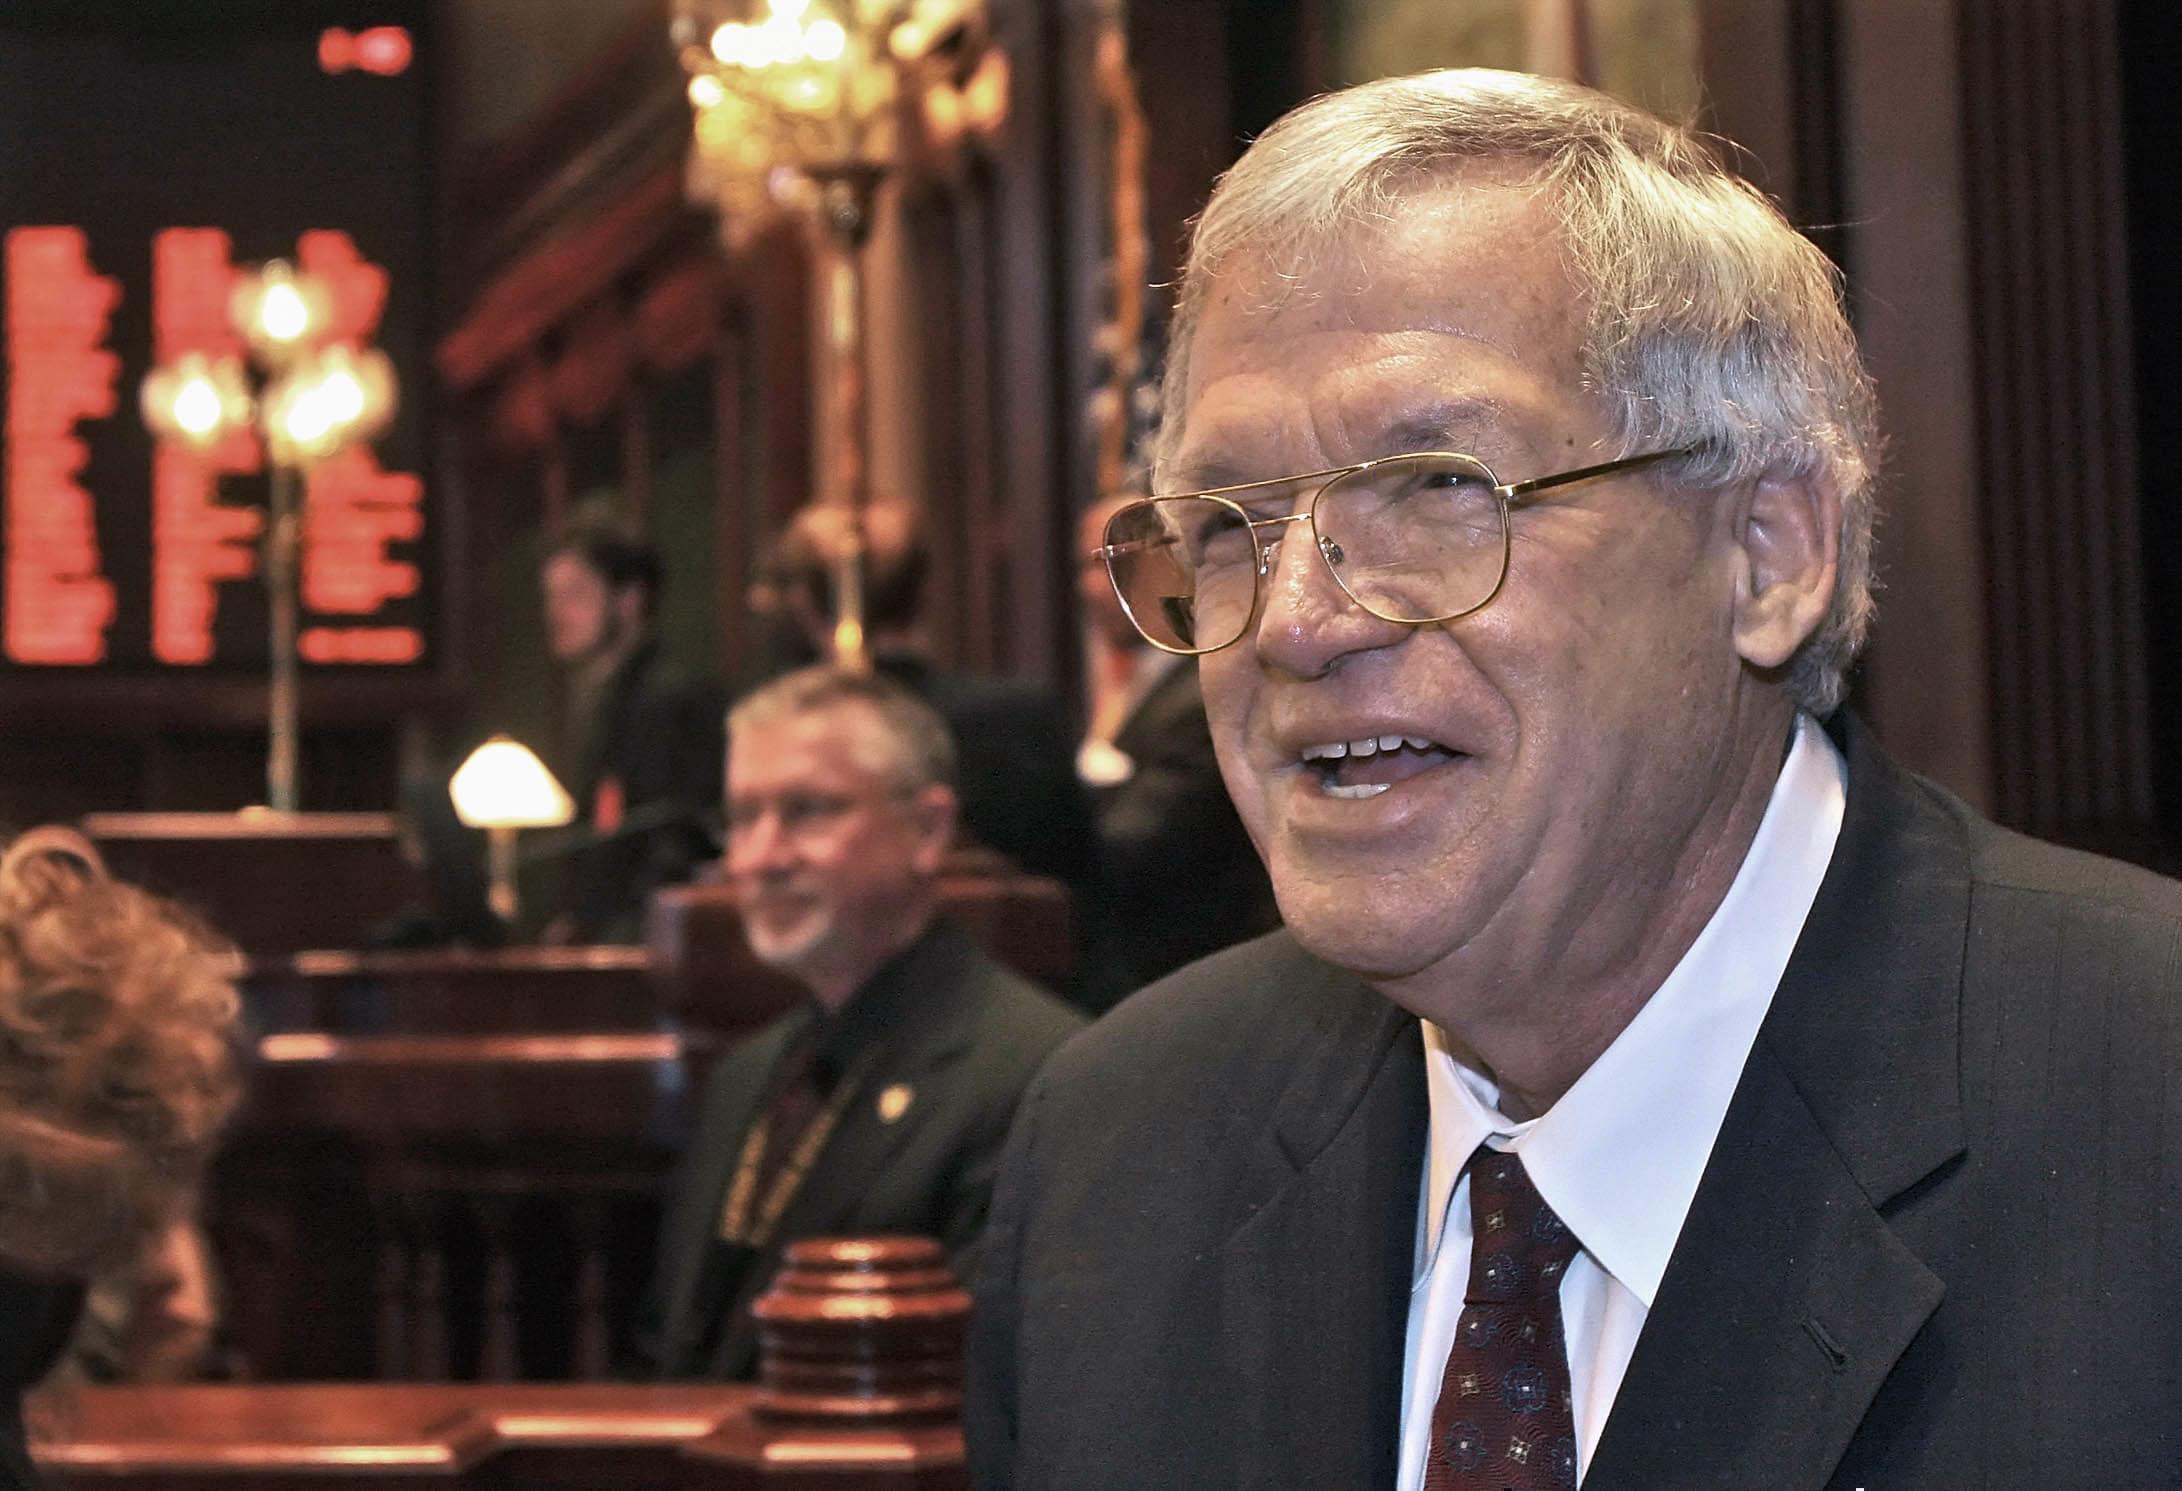 A March 5. 2008 file photo shows former U.S. House Speaker Dennis Hastert visiting the Illinois House of Representatives floor at the state Capitol in Springfield,